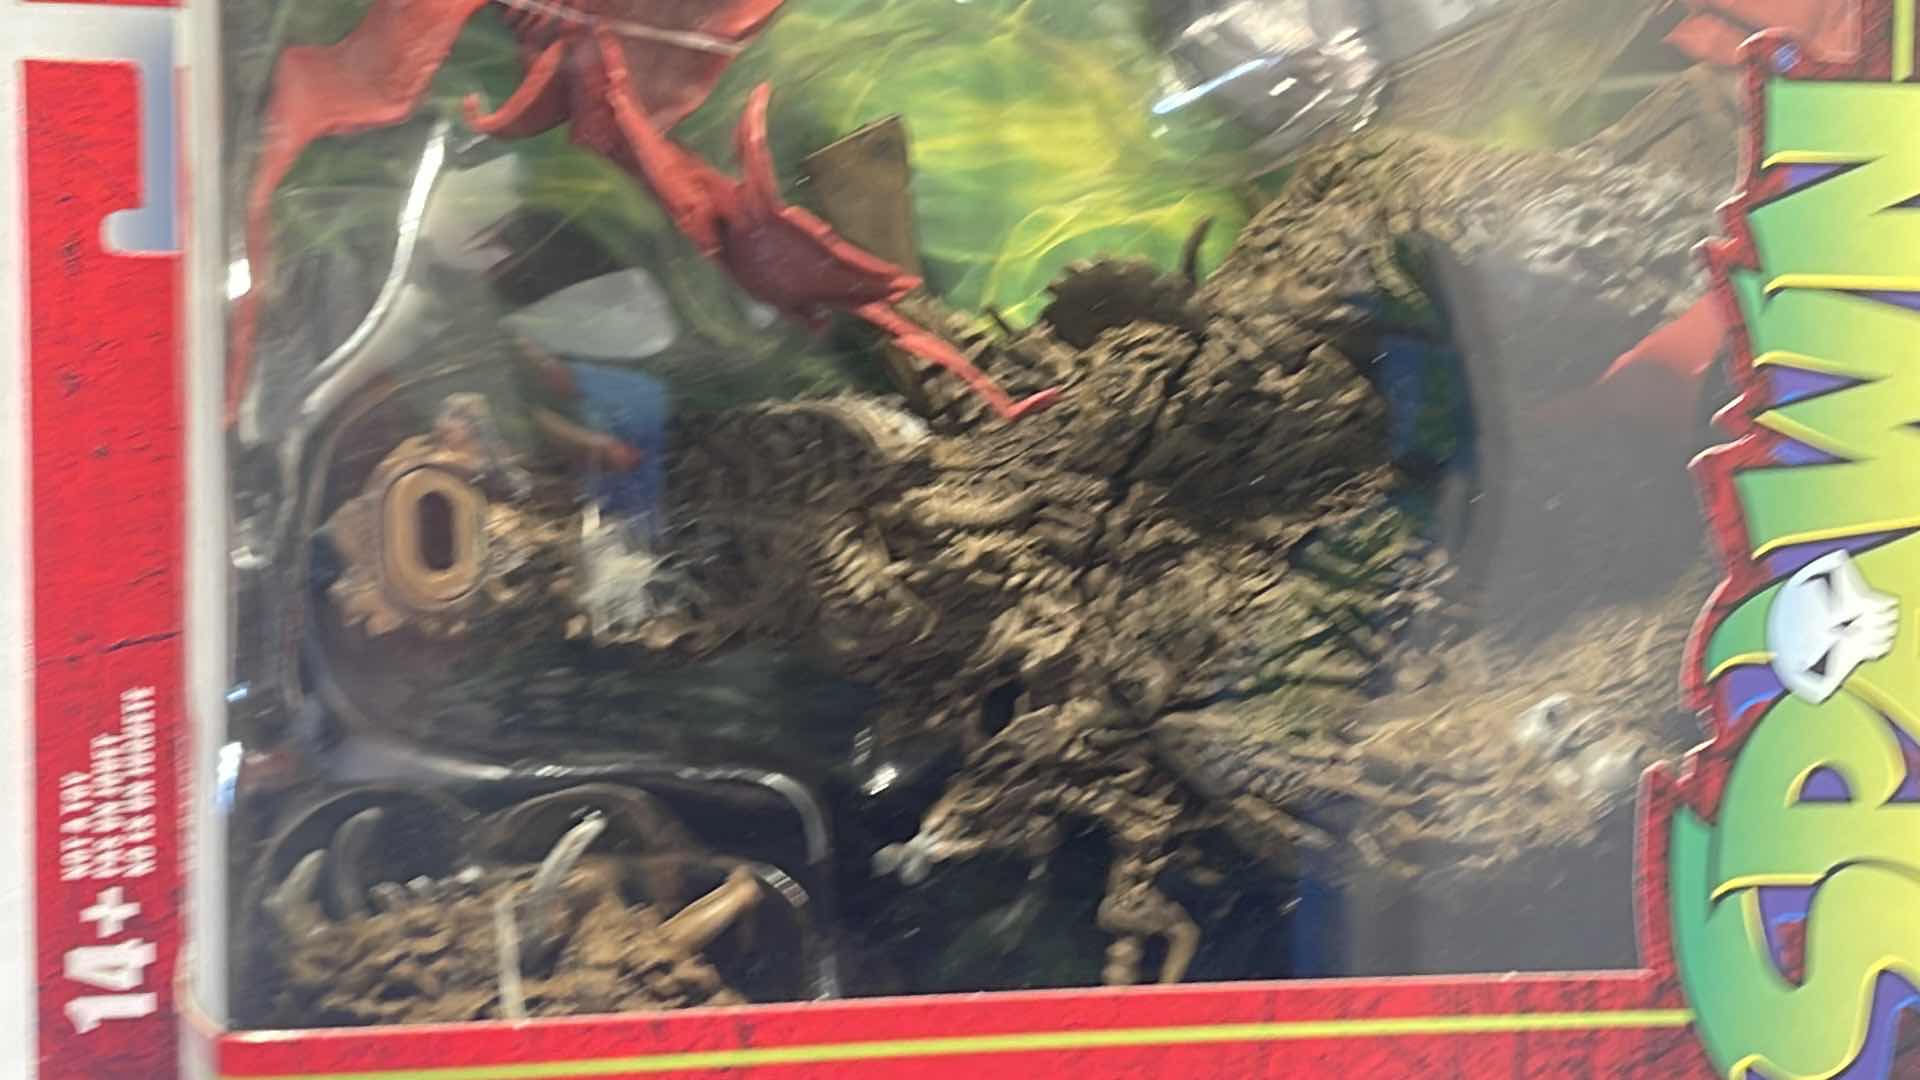 Photo 3 of NIB SPAWN (WITH THRONE) ACTION FIGURE AND ACCESSORIES, MCFARLANE TOYS - RETAIL PRICE $49.95